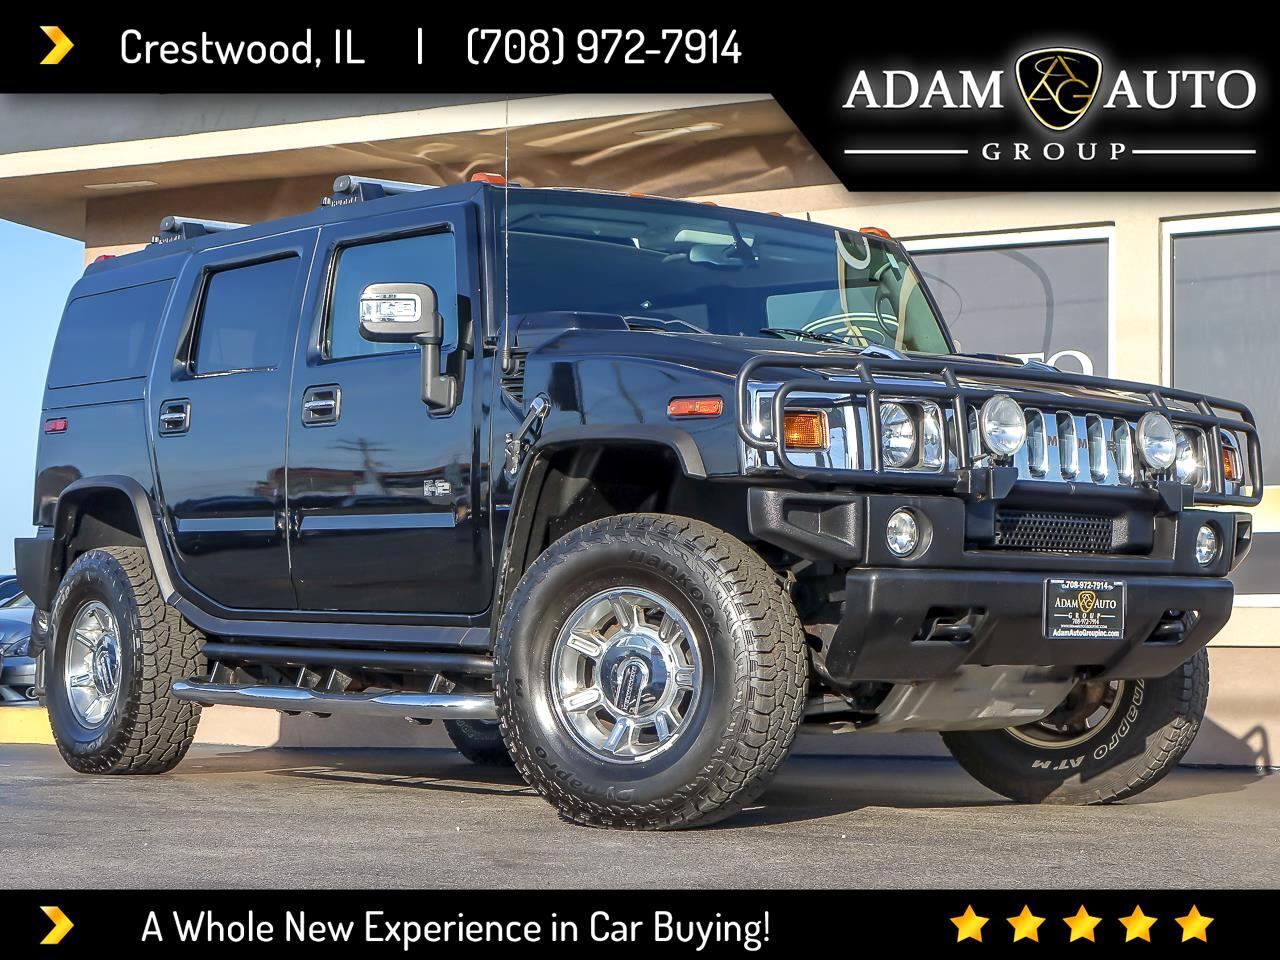 Used 2007 Hummer H2 Luxury For Sale In Crestwood Il 60445